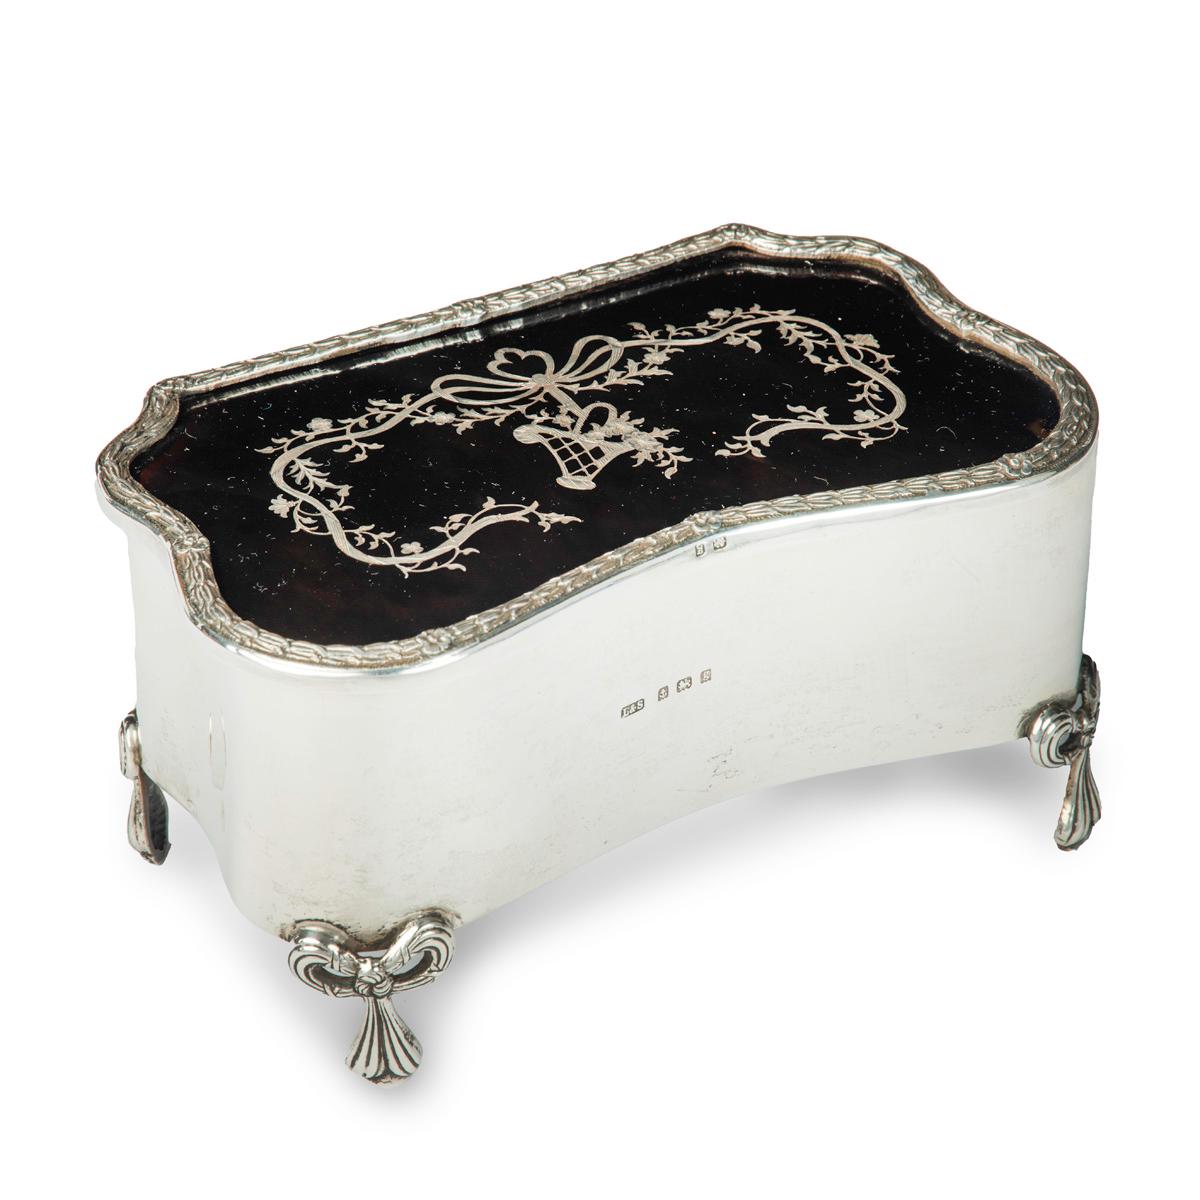 A large Edwardian shaped rectangular silver and tortoiseshell piqué box, the hinged lid with a dainty basket suspended from a bow with long ribbons entwined with flowering tendrils, all within a laurel and flowerhead border, raised on four tied-bow